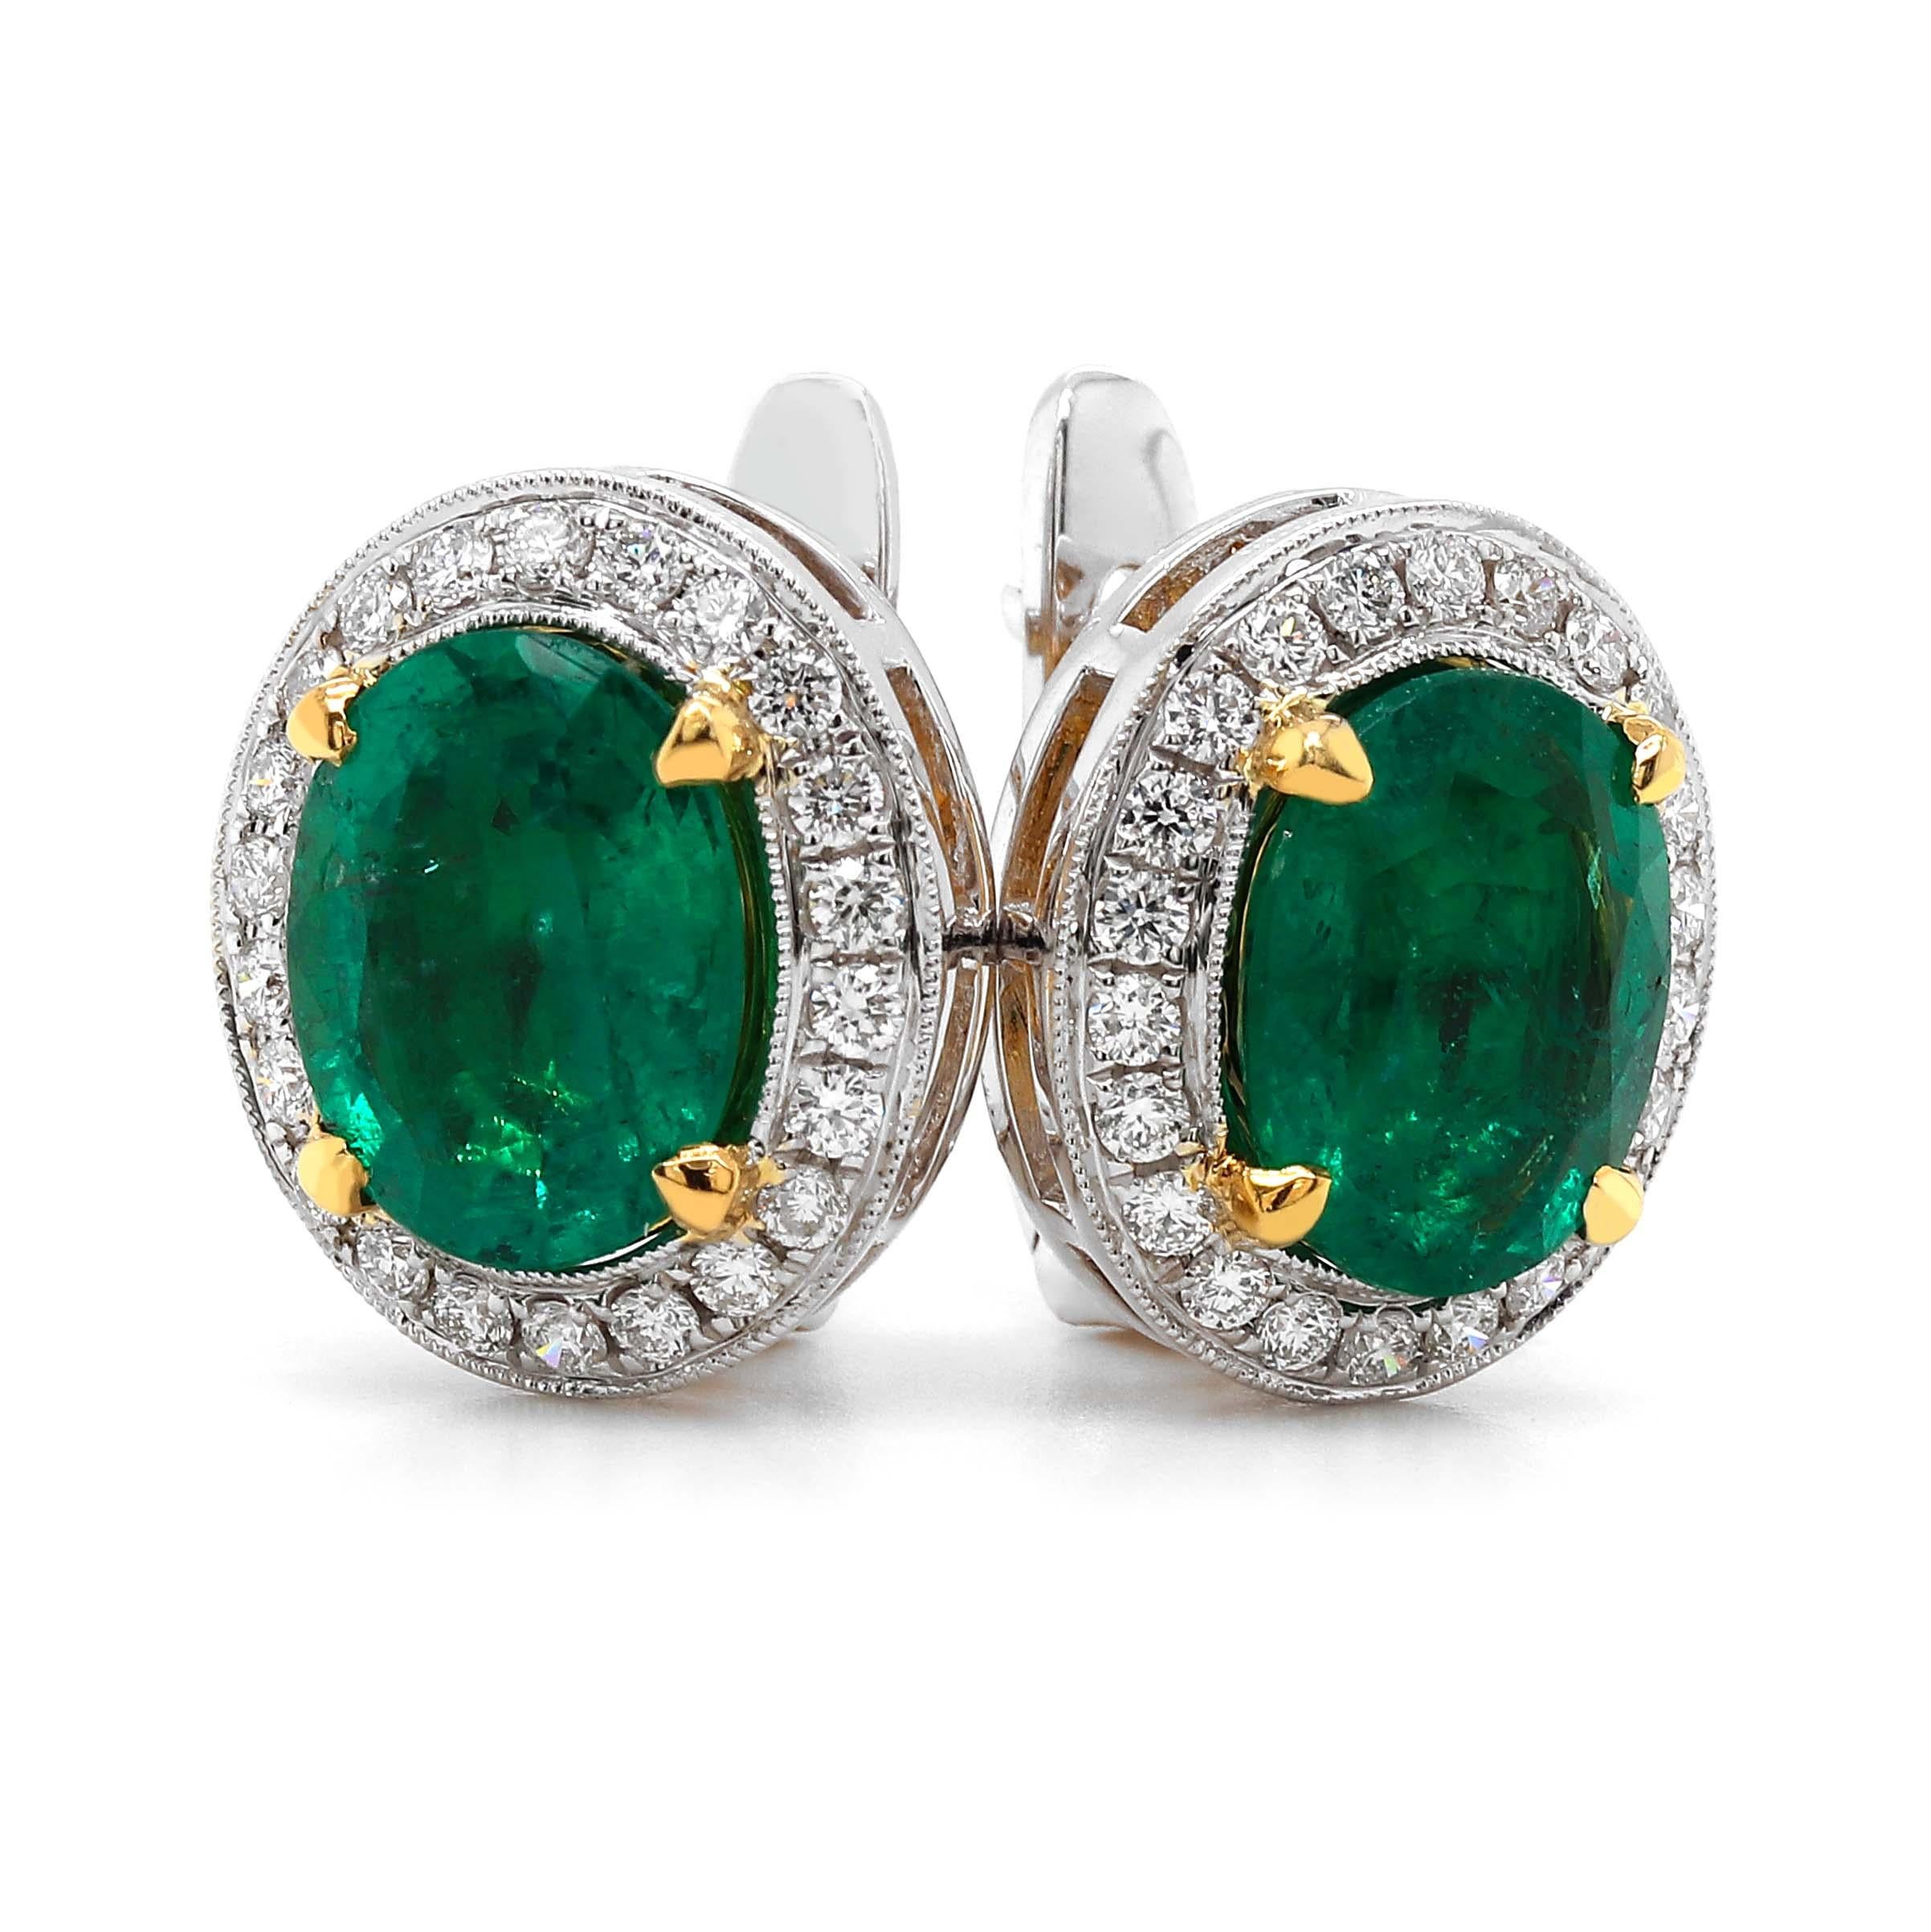 Two Fine 2.50 carat oval emeralds of about 2.50 carats. The emeralds are surrounded by 44 round brilliant cut diamonds of about 0.67 carats with a clarity of VS and color G. All stones are set in 18k 2 tone gold. The total weight of the earrings is